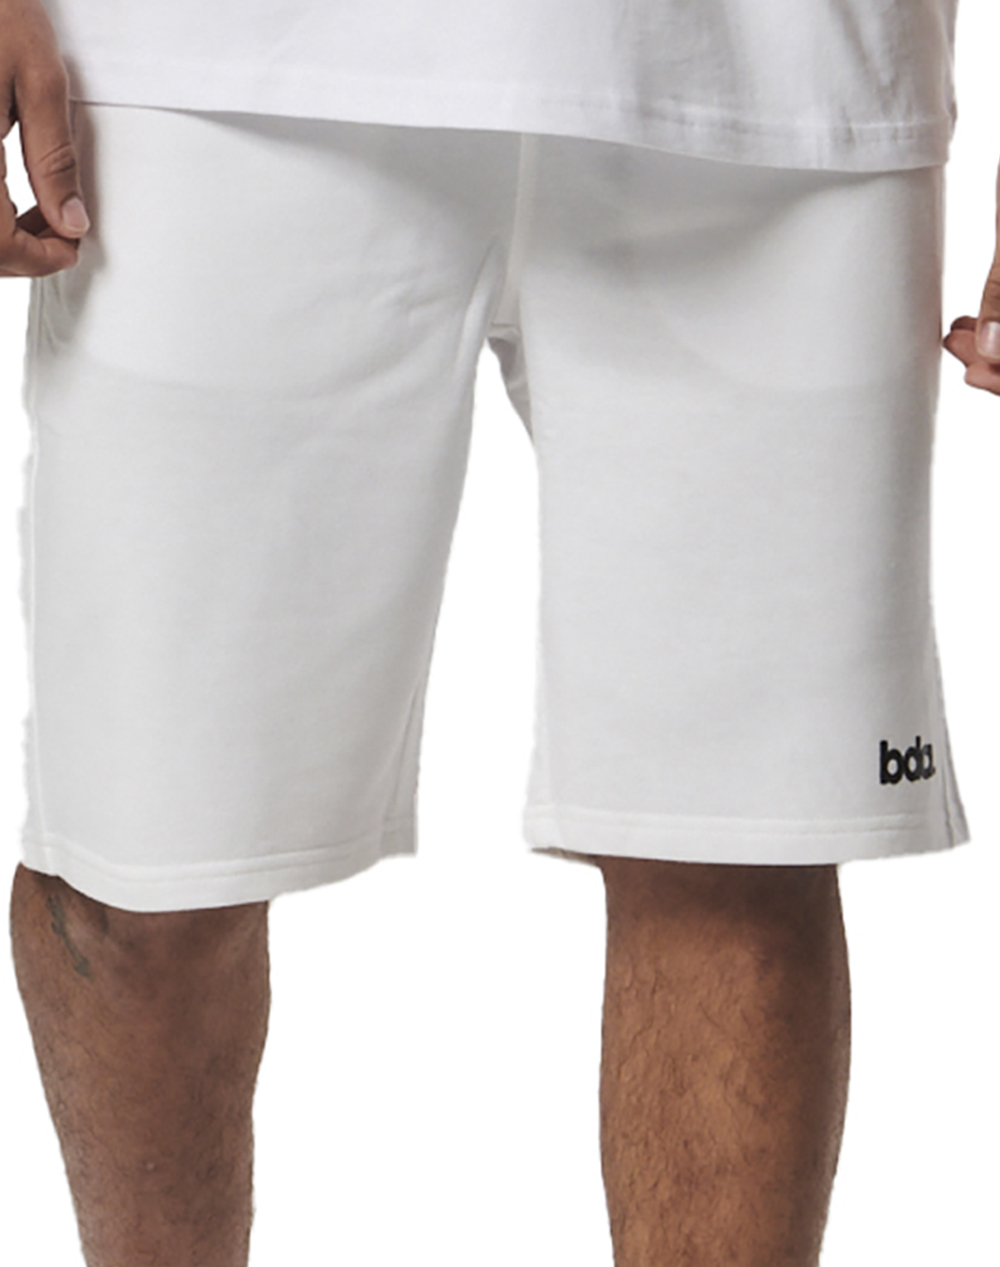 BODY ACTION MEN”S ESENTIAL SPORT SHORTS W/ZIPPERS 033416-01-WHITE White